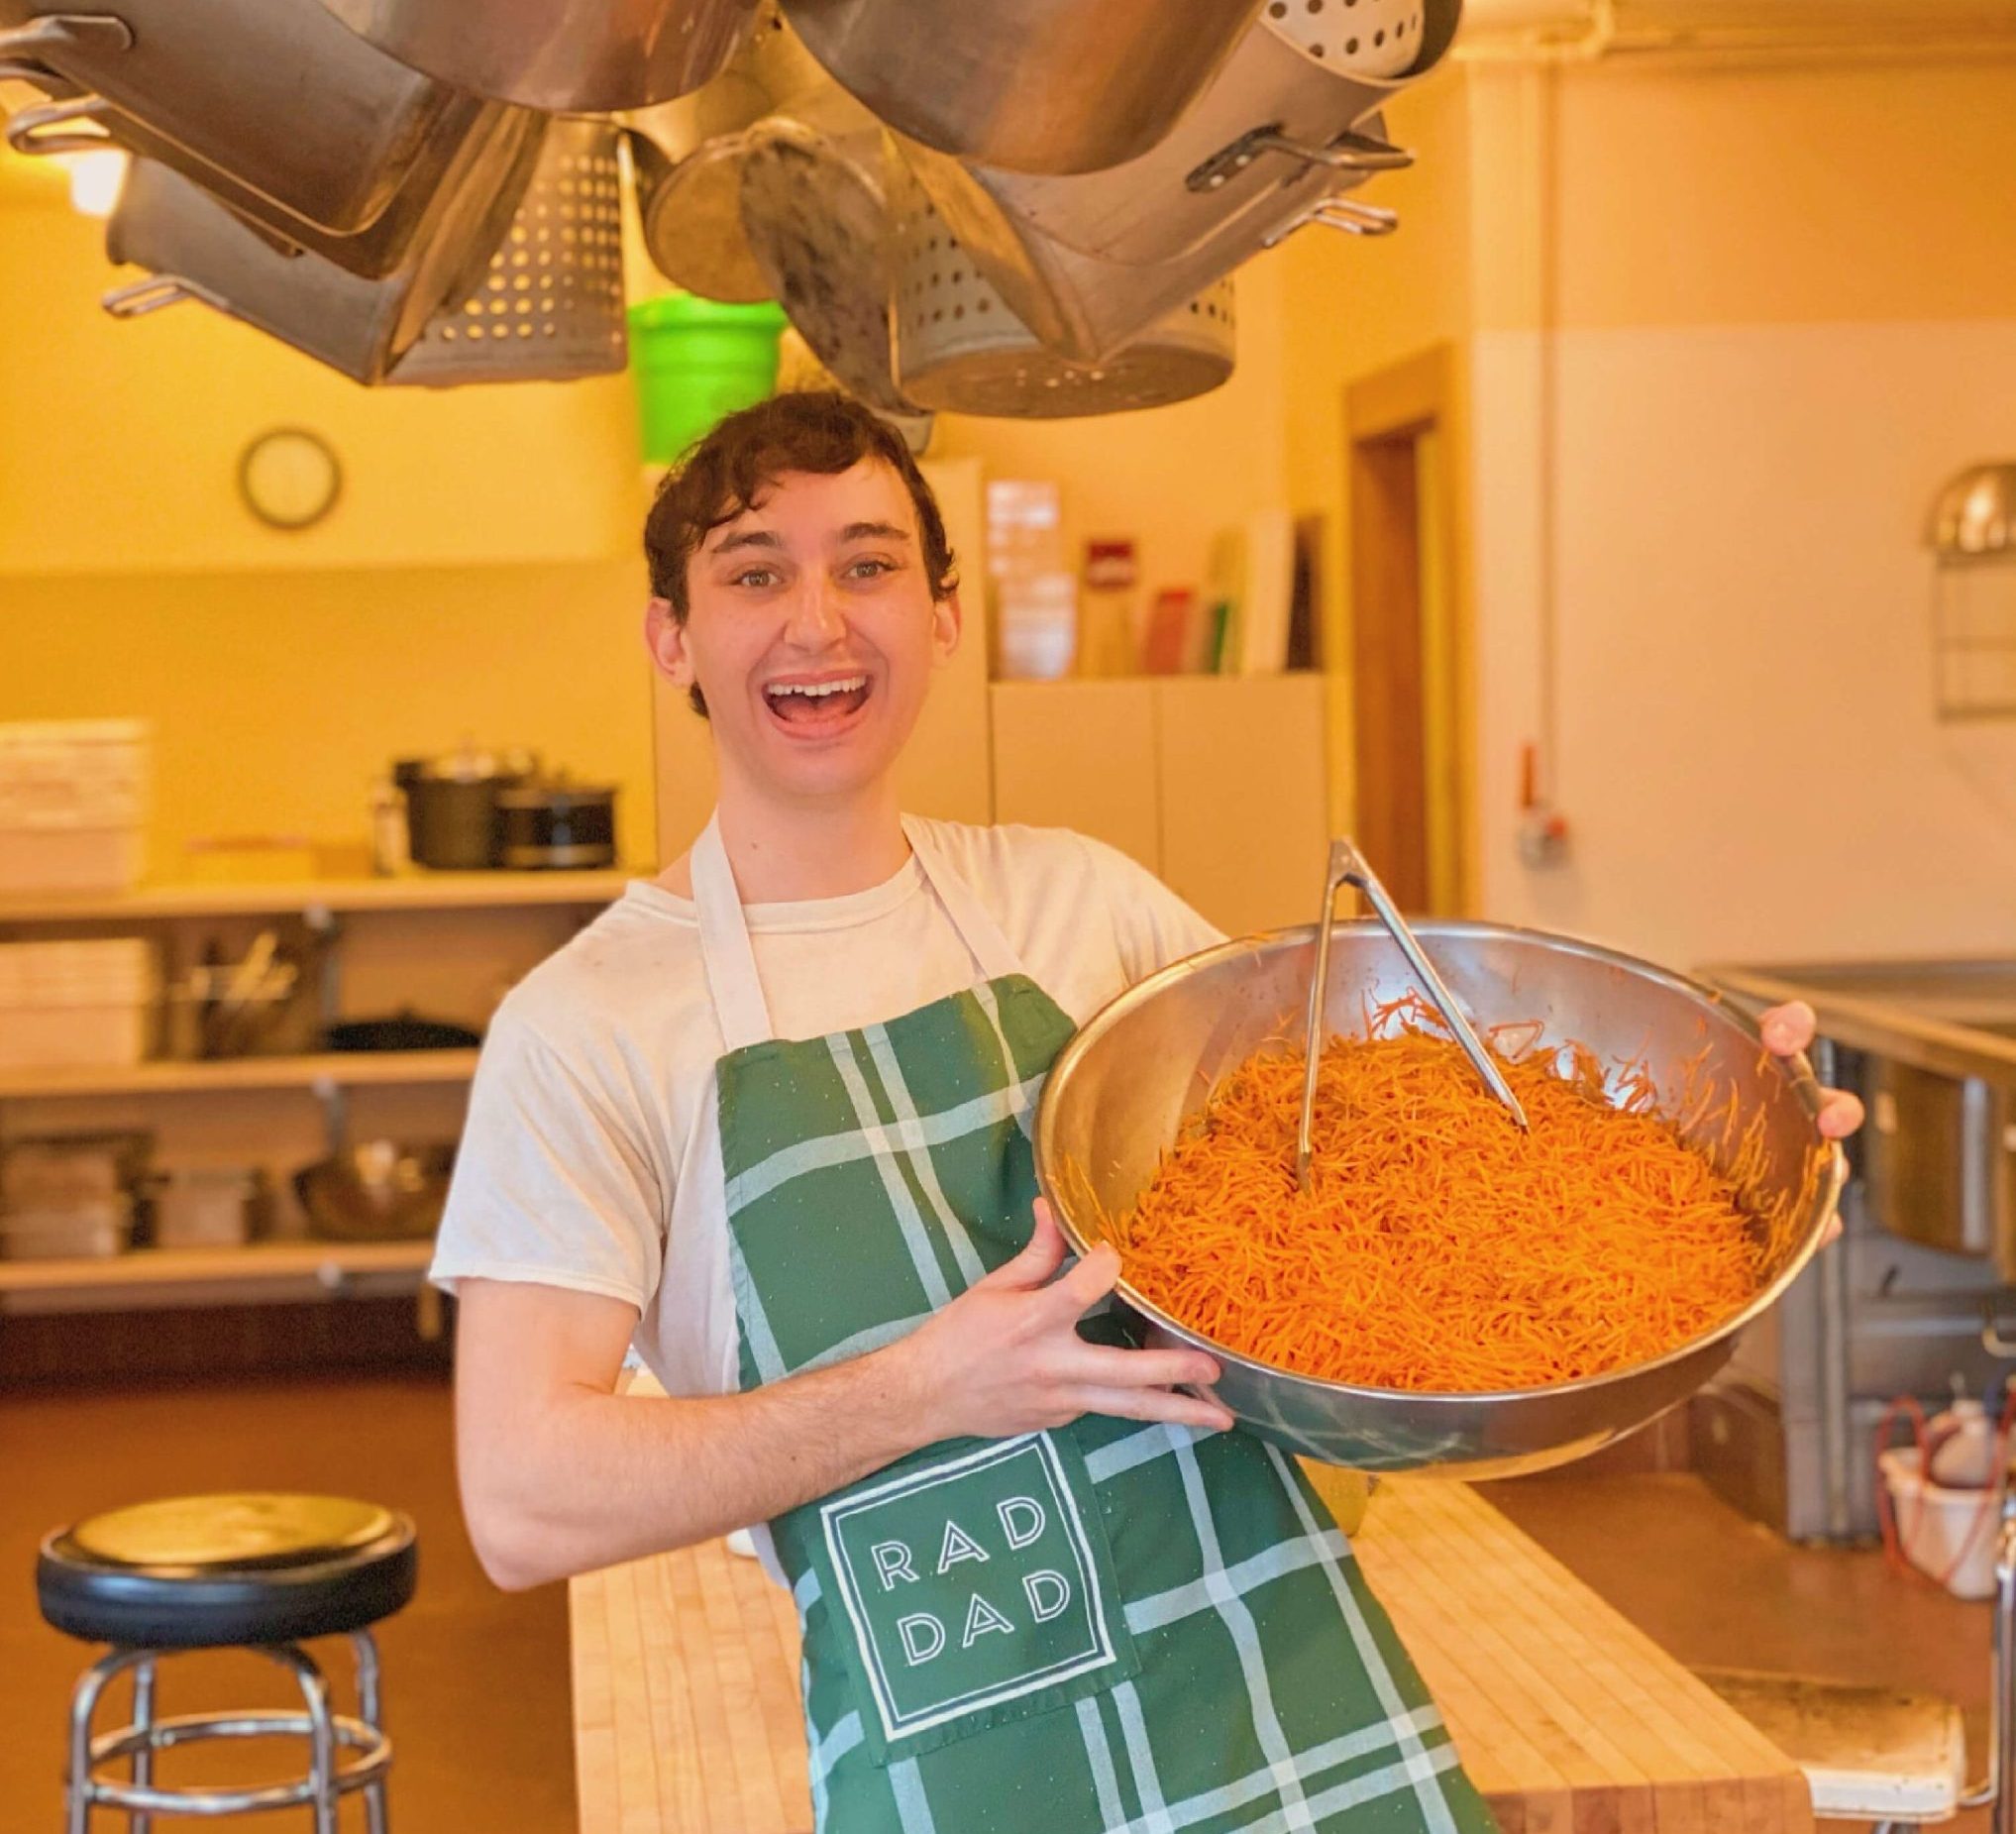 Nicolo smiles for the camera while holding a large metal bowl full of spaghetti. He is wearing an apron that reads "rad dad" and he is standing in a kitchen with many pots hanging from the ceiling above him.